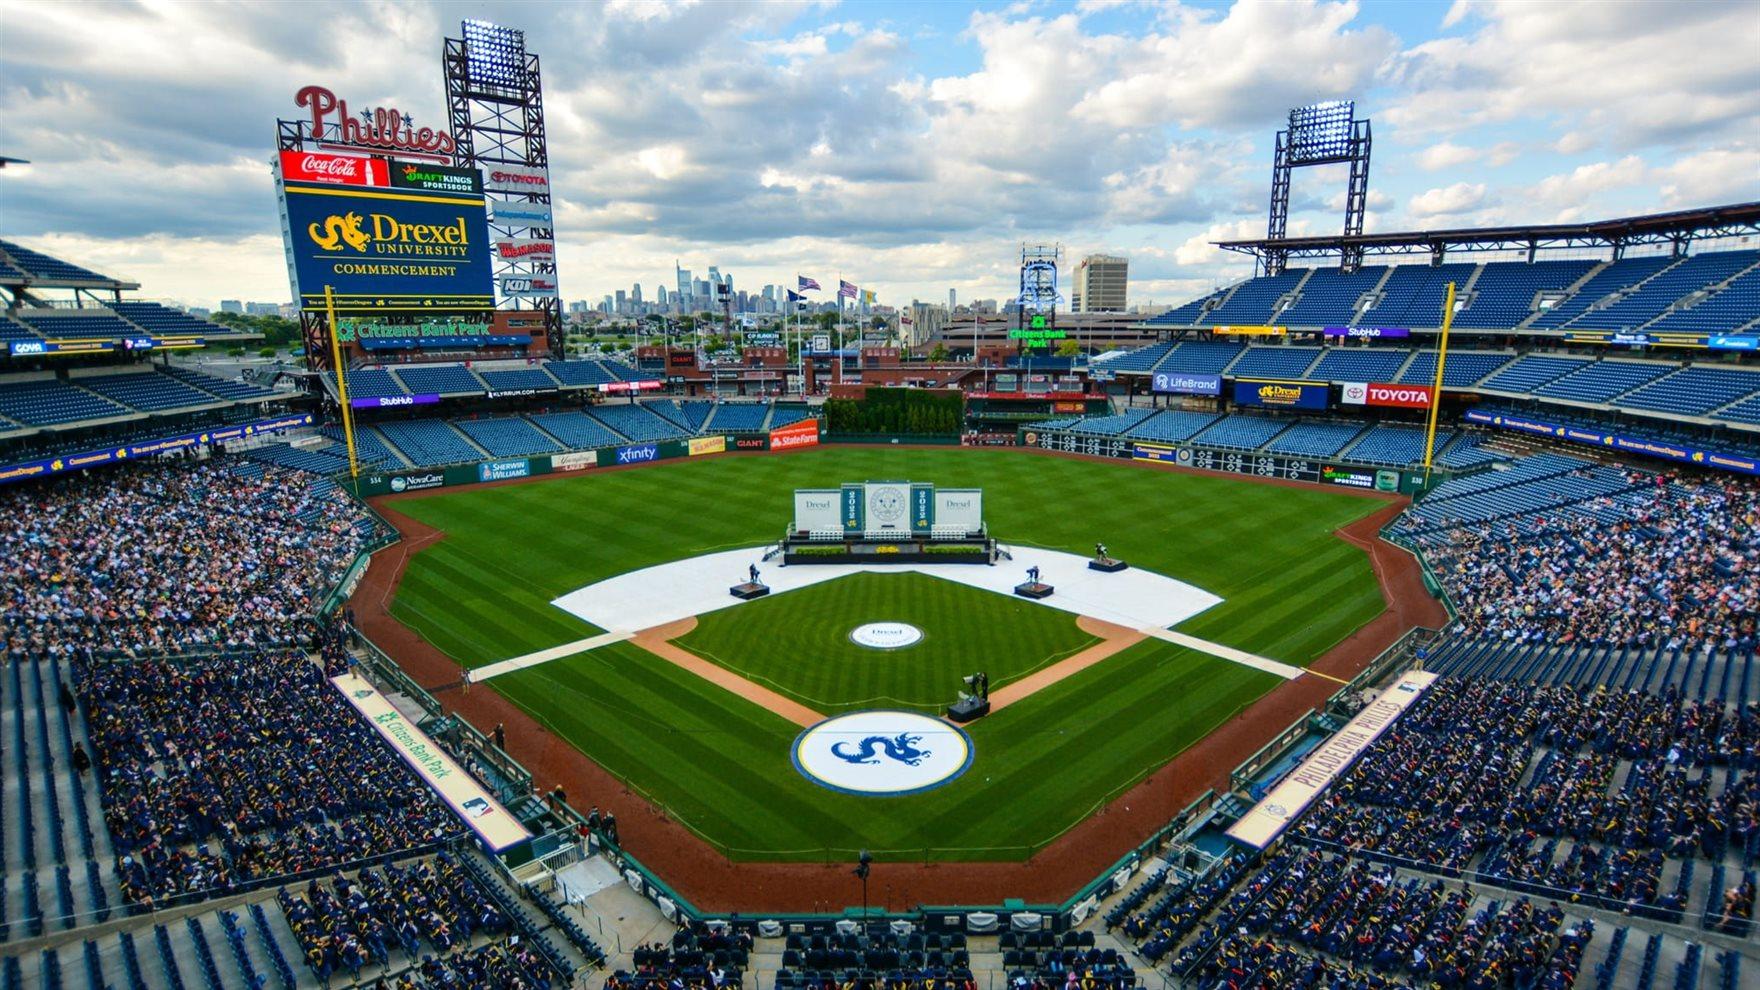 The scene at Citizens Bank Park during Drexel's June 9 Commencement.